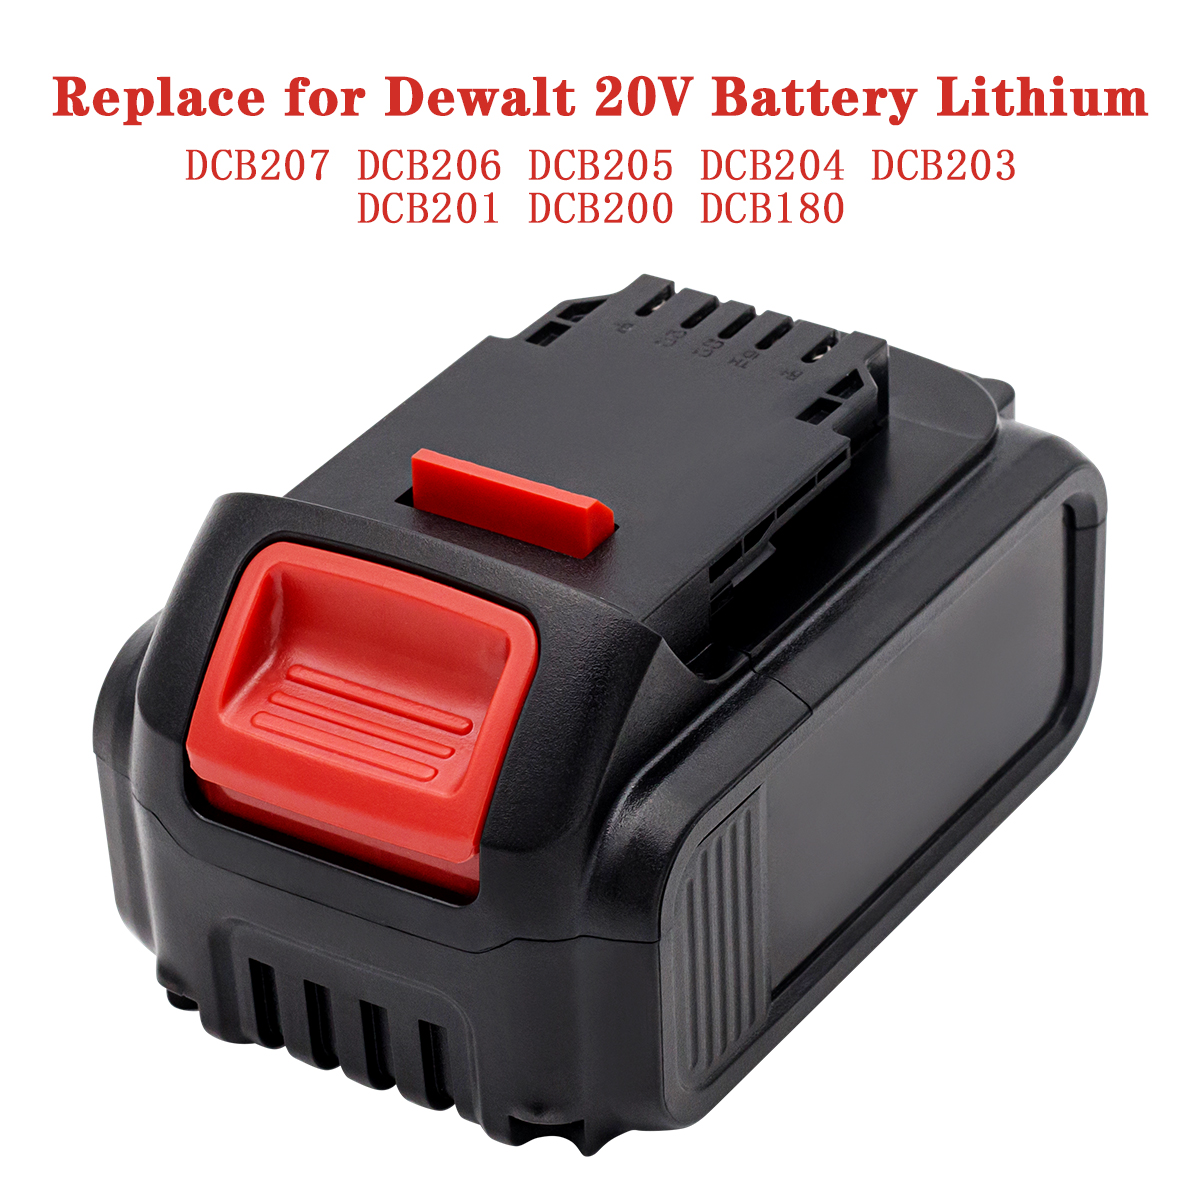 2Pcs-20V-40Ah-Replaceable-Power-Tool-Battery-Replacement-For-Dew-DCB200-DCB180-DCB181-DCB182-DCB184--1878122-4